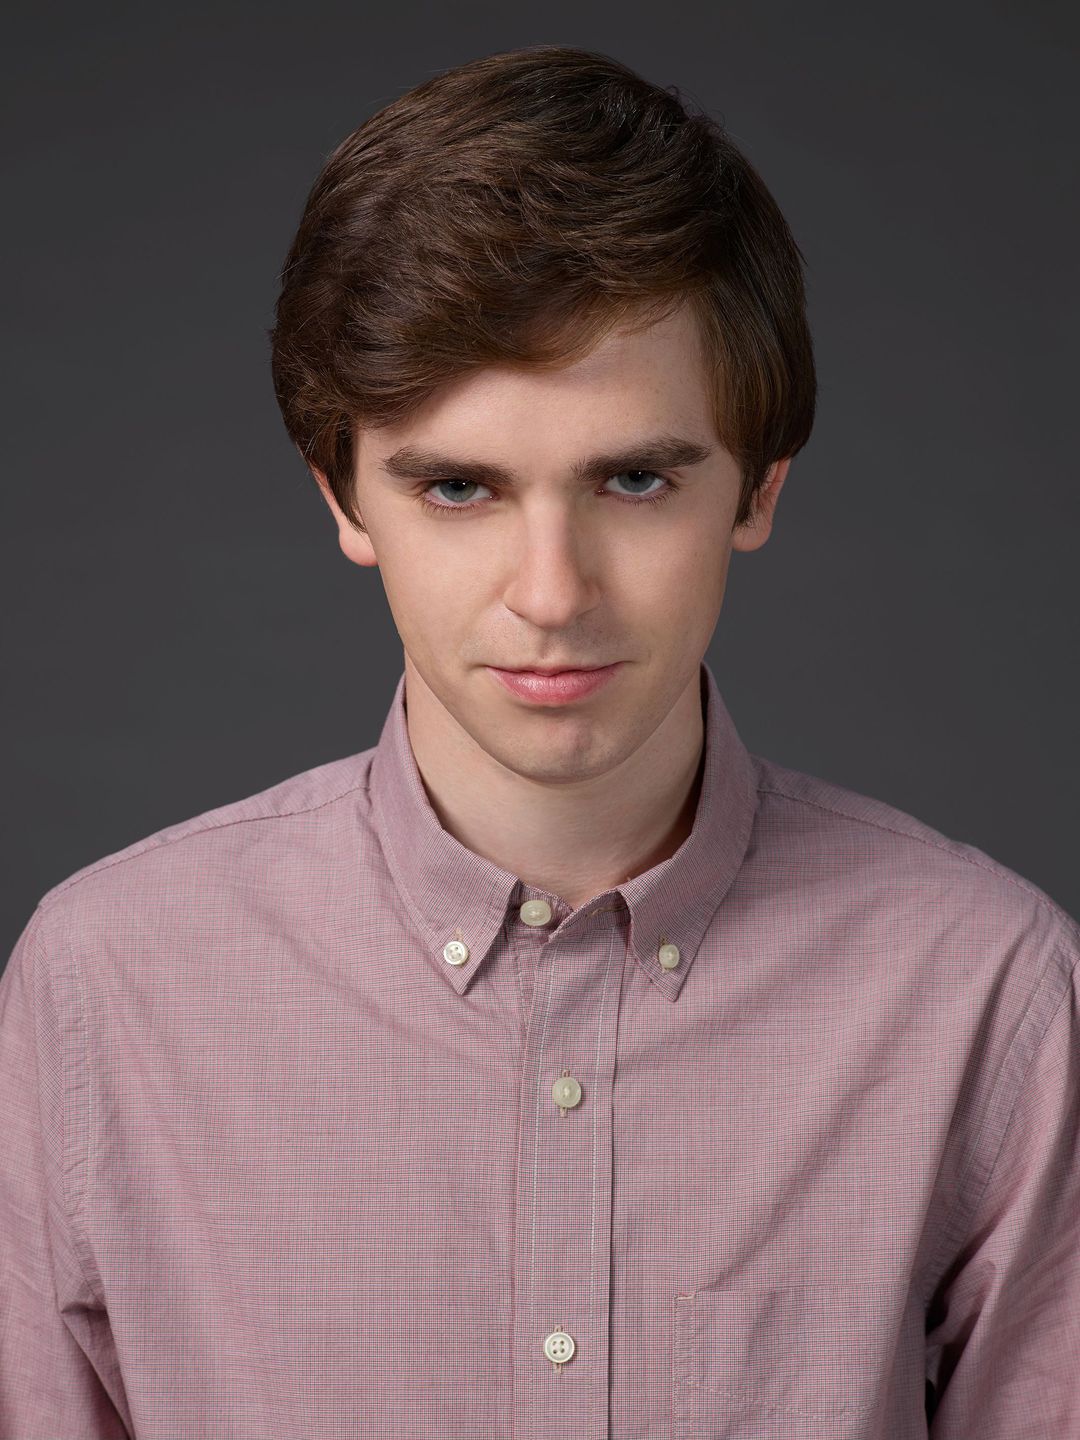 Freddie Highmore who is his father